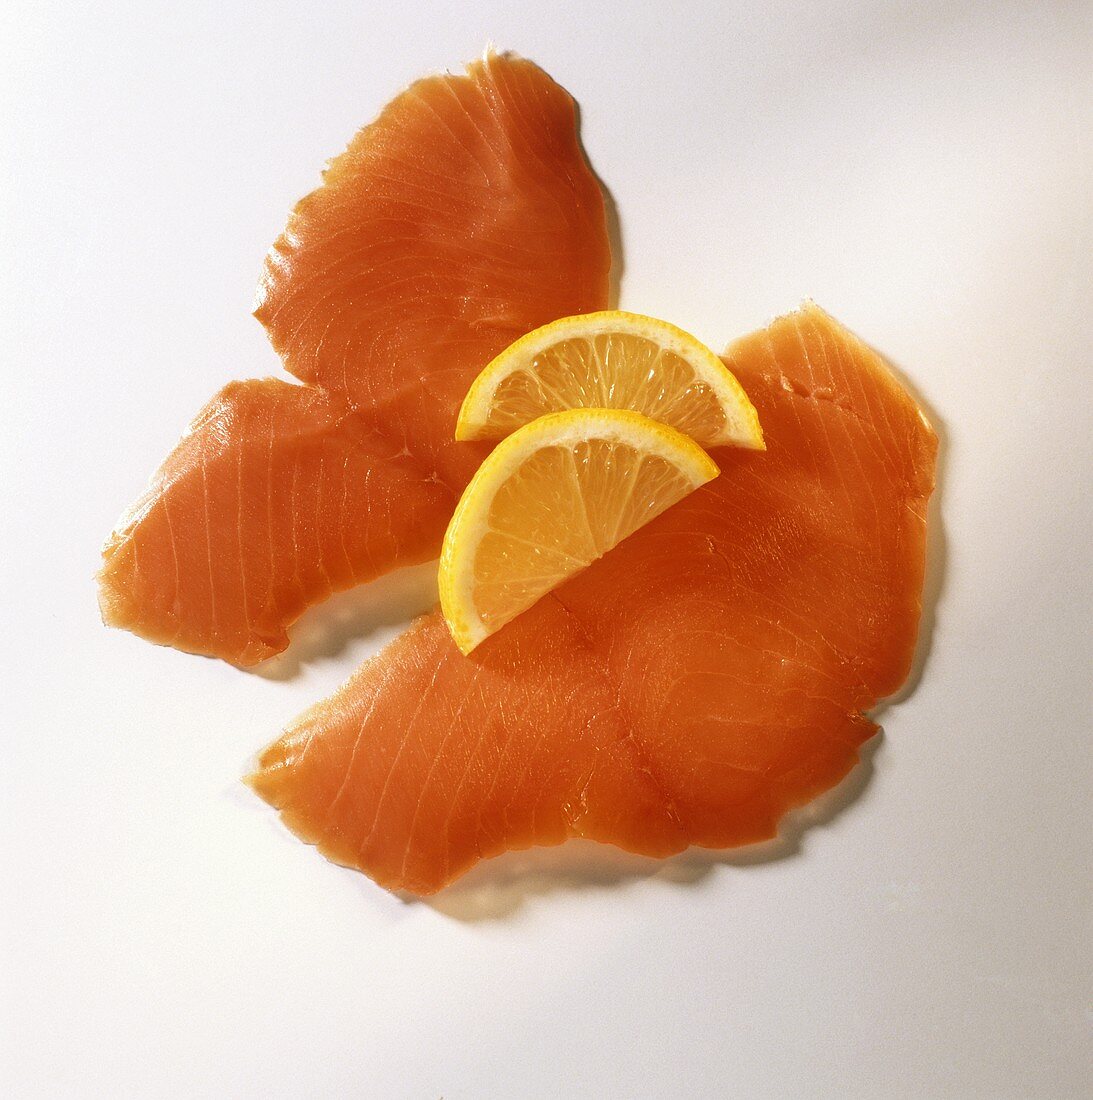 Two slices of smoked wild salmon garnished with lemon